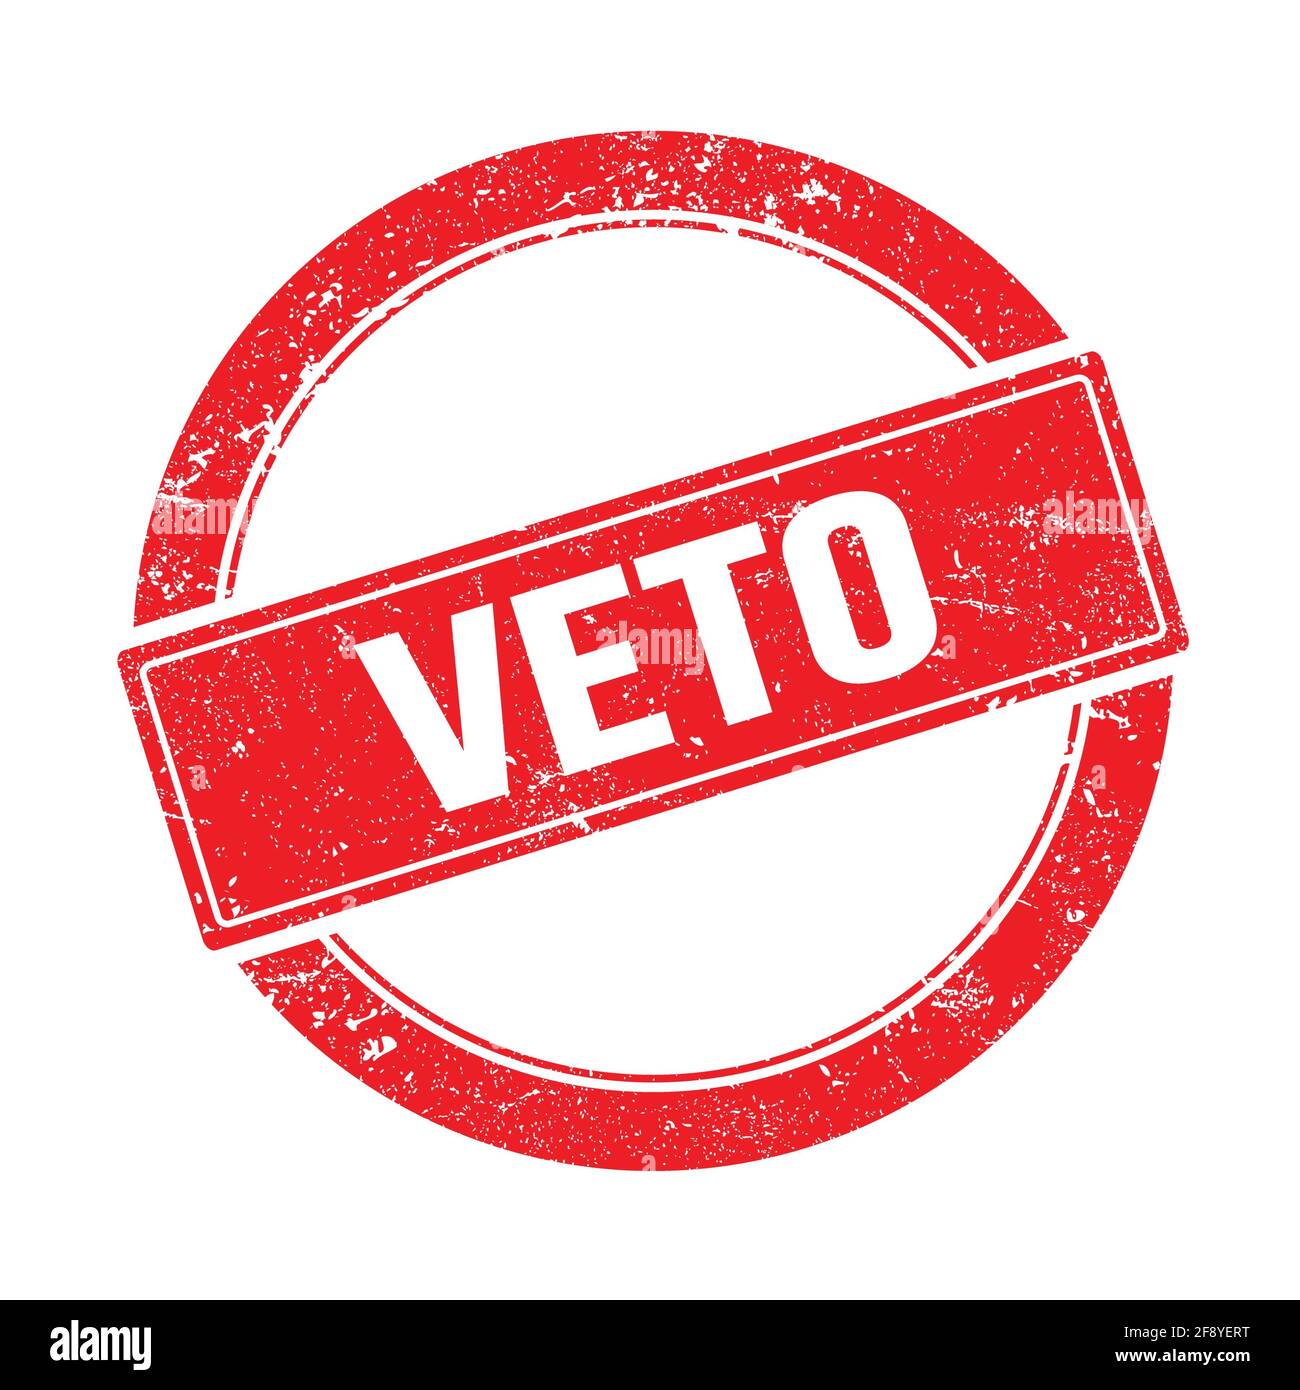 VETO text on red grungy round vintage stamp Stock Photo - Alamy